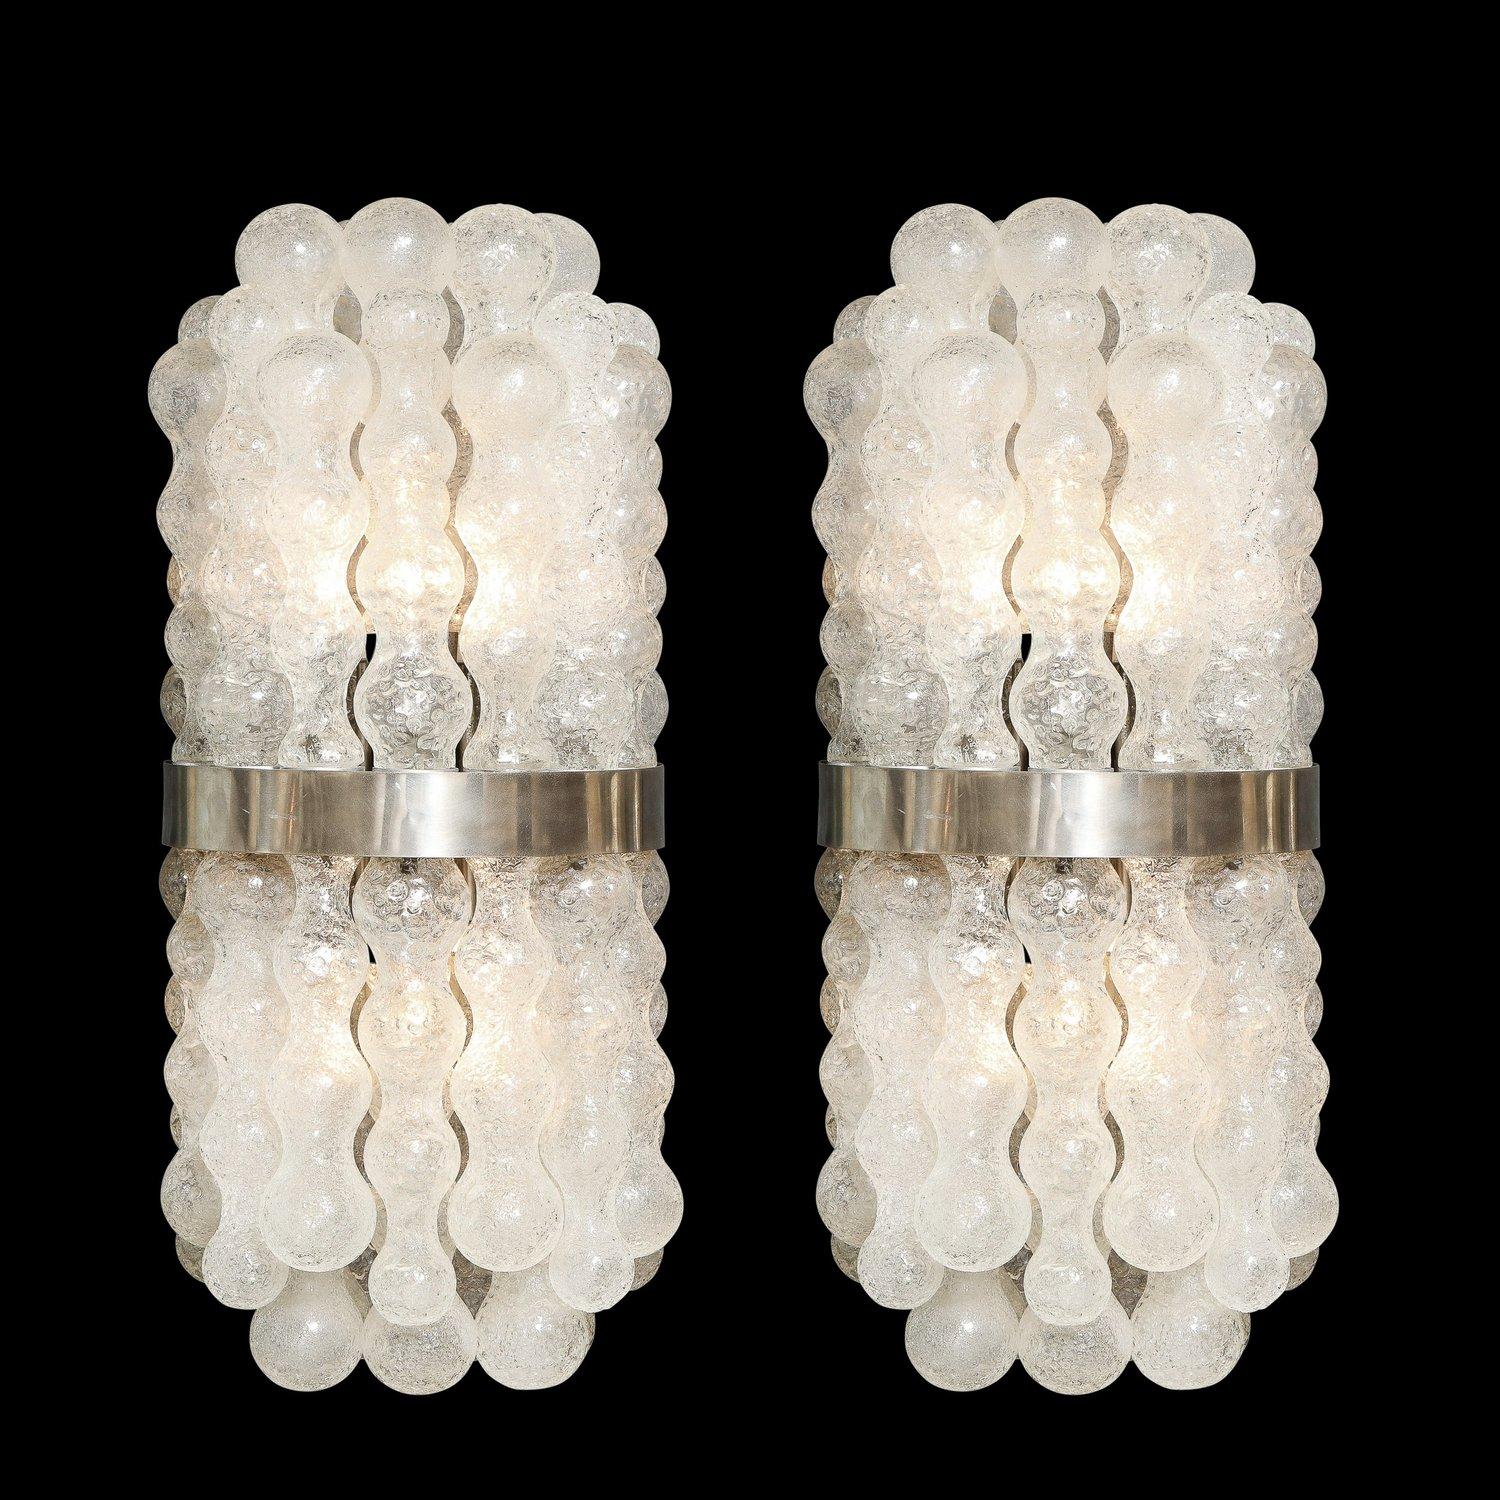 This sophisticated and stunning pair of Mid-Century Modern sconces were realized in Murano, Italy- the island off the coast of Venice renowned for centuries for its superlative glass production. They feature bowed bodies composed of a wealth of